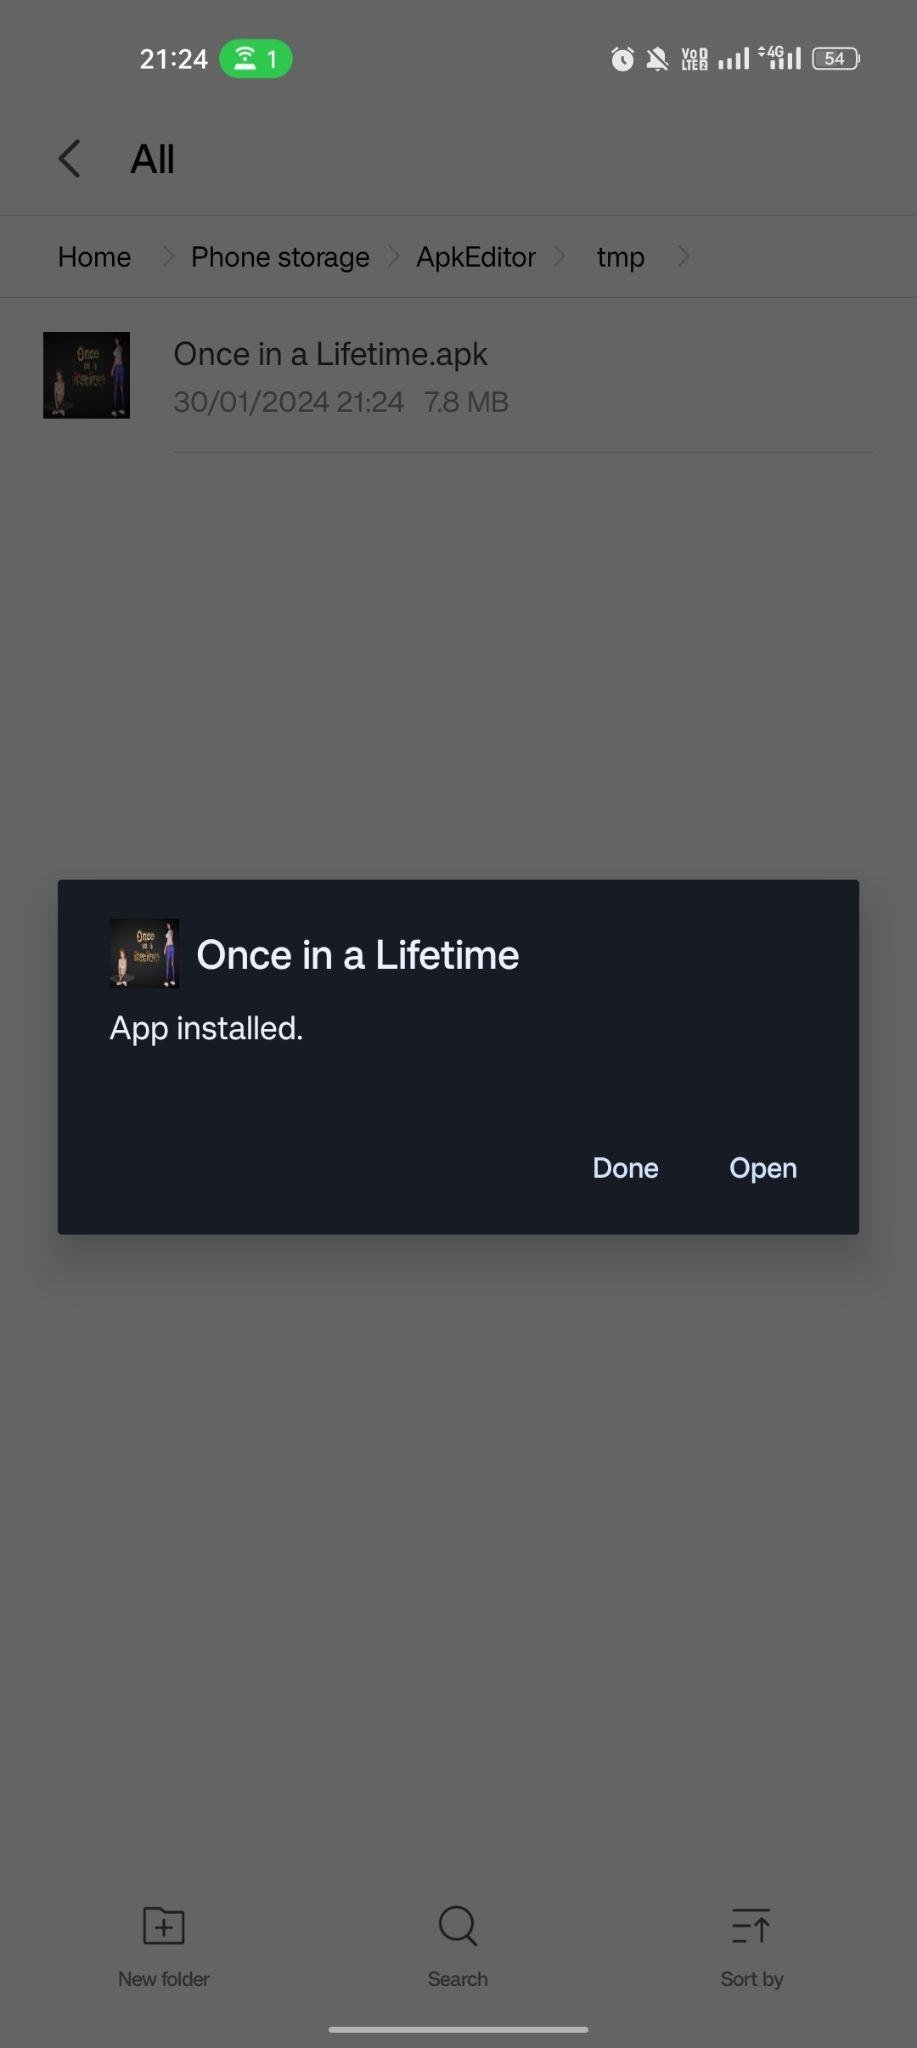 Once In a Lifetime apk installed